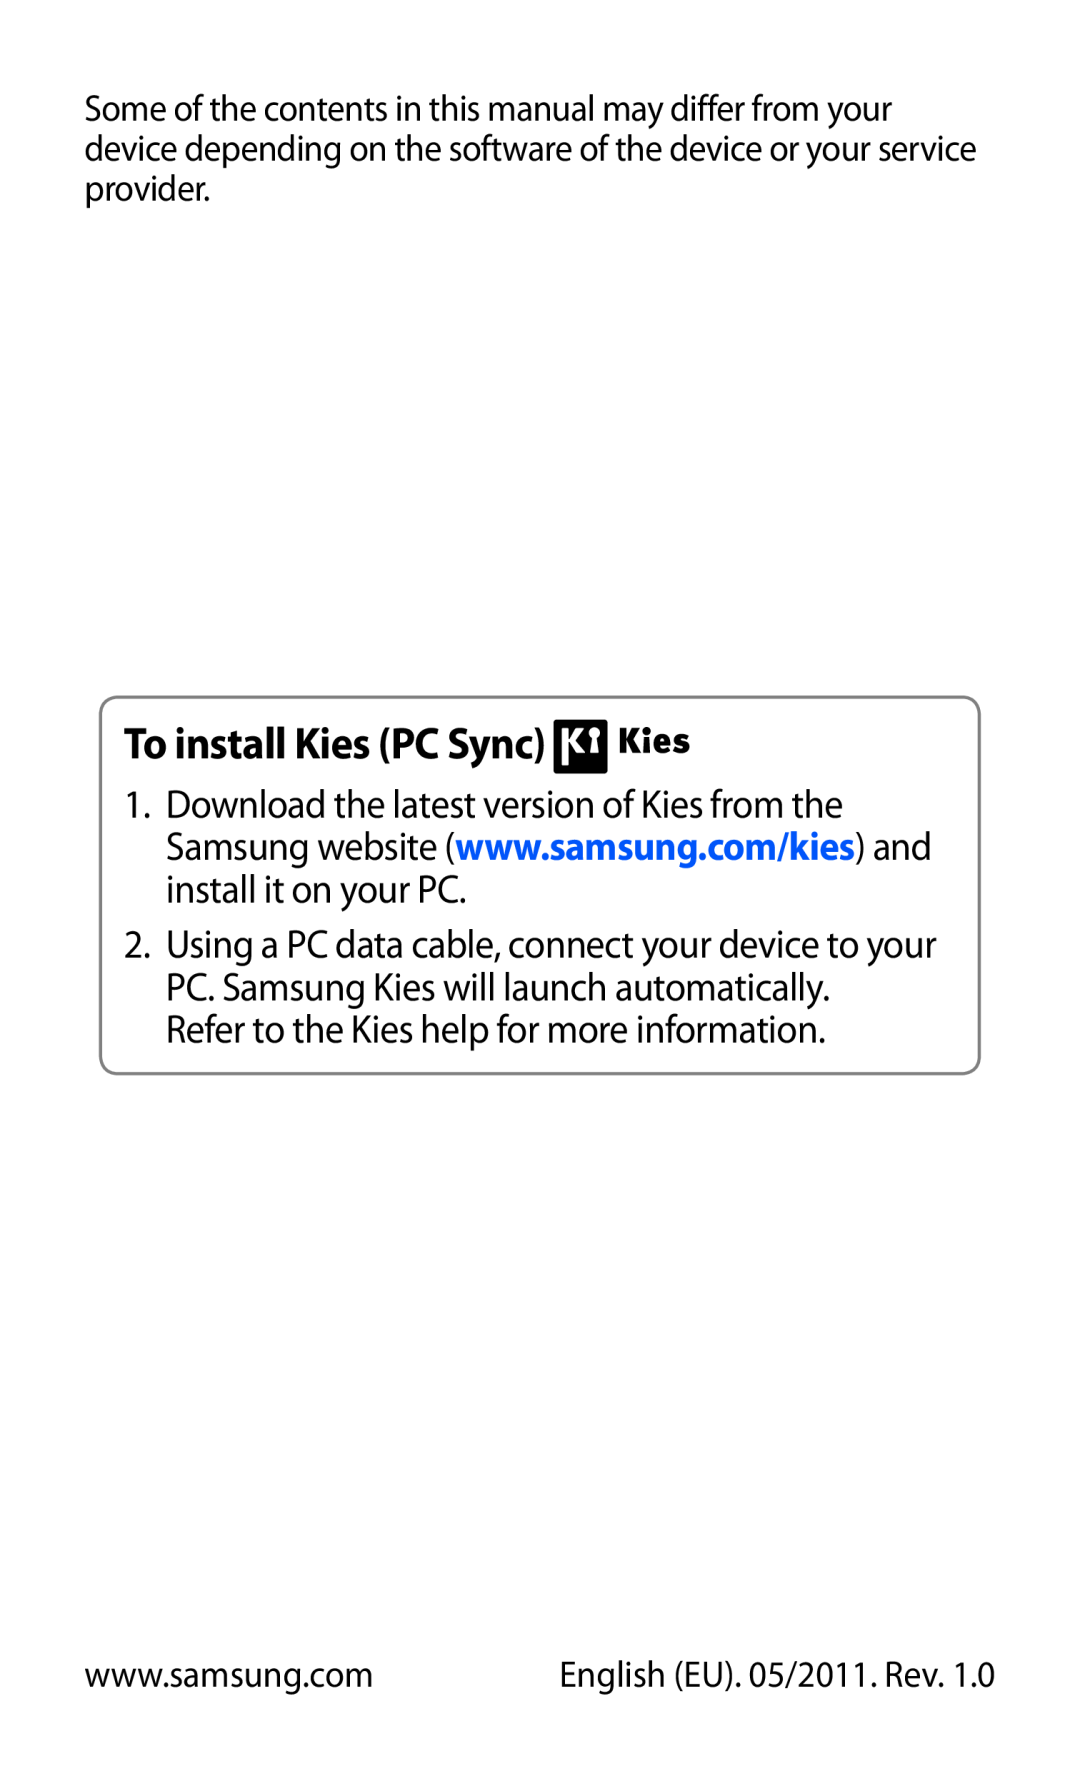 Samsung GT-P7510 user manual To install Kies PC Sync, Refer to the Kies help for more information 